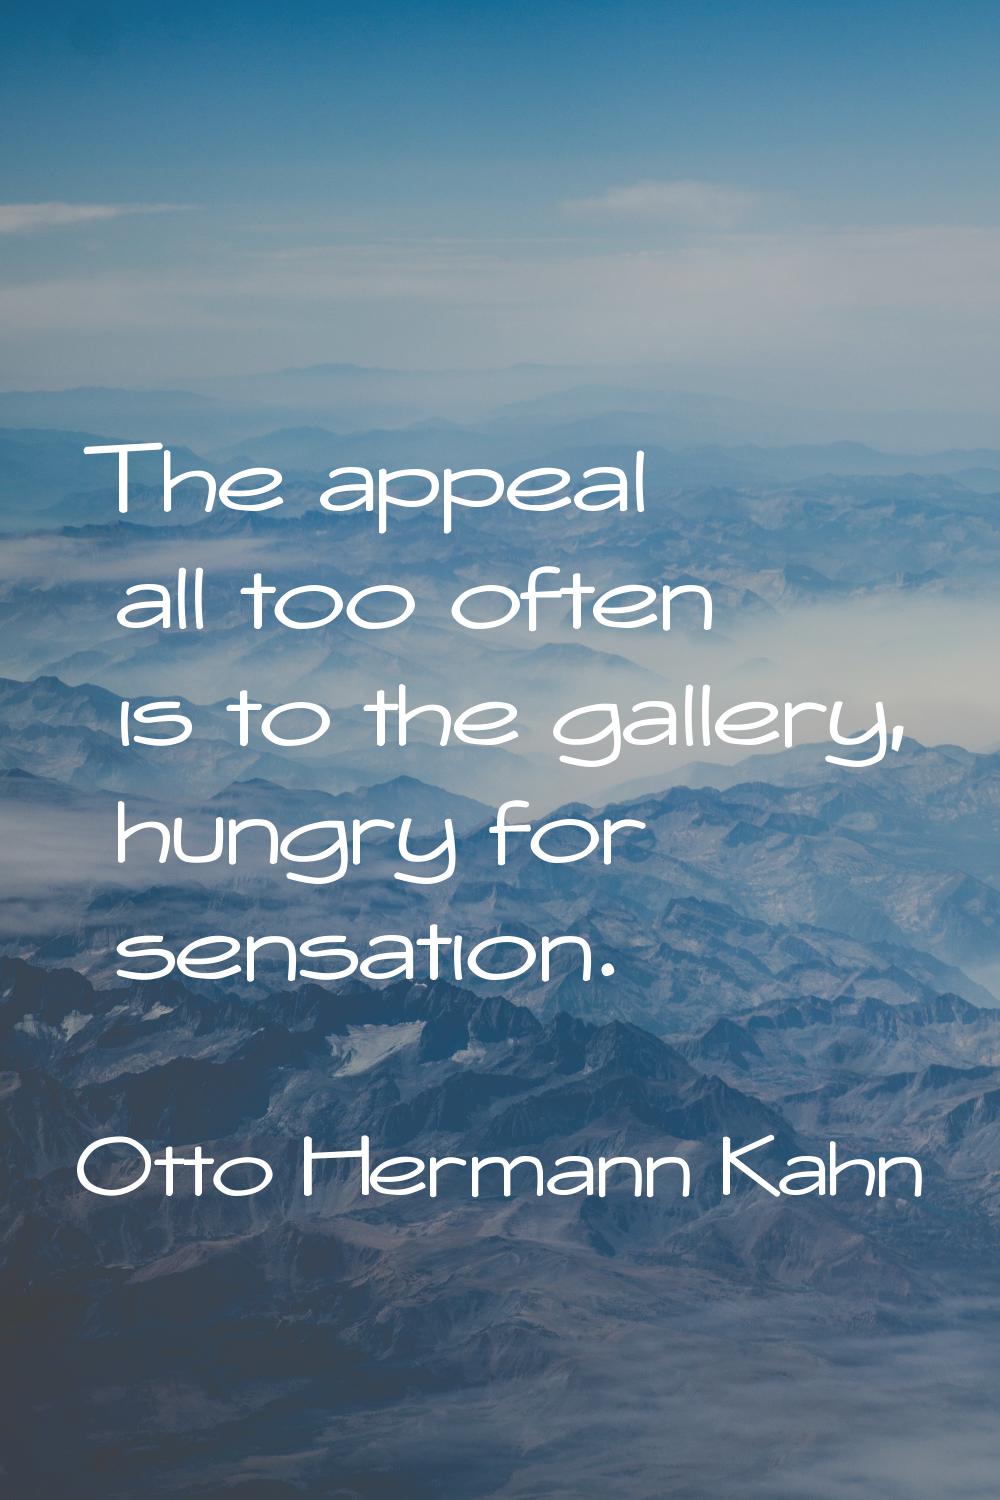 The appeal all too often is to the gallery, hungry for sensation.